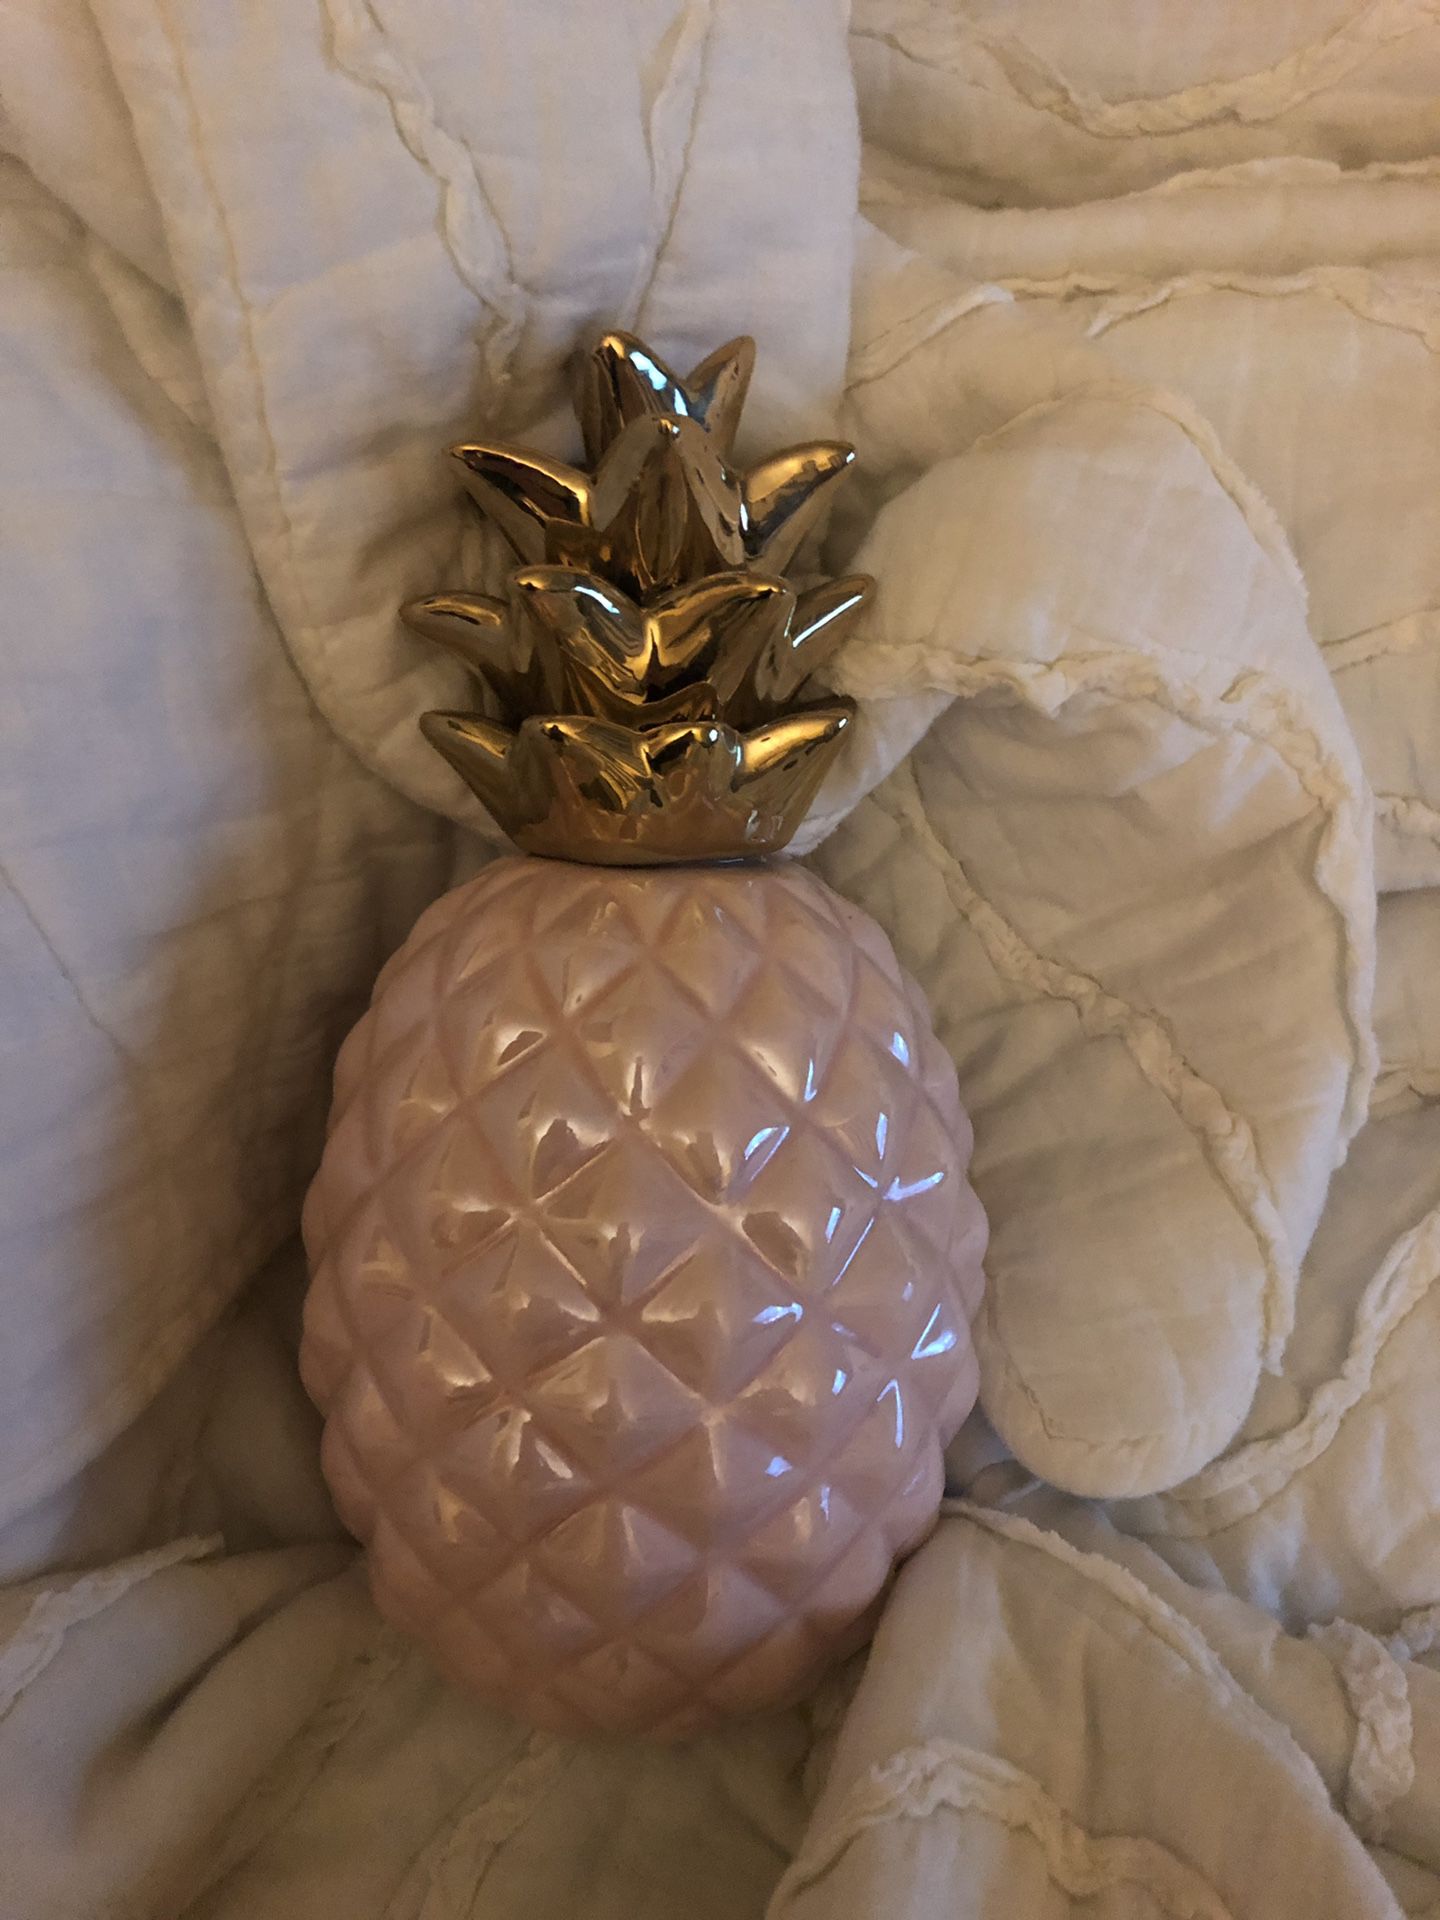 Decorative pineapple from Nordstrom Rack